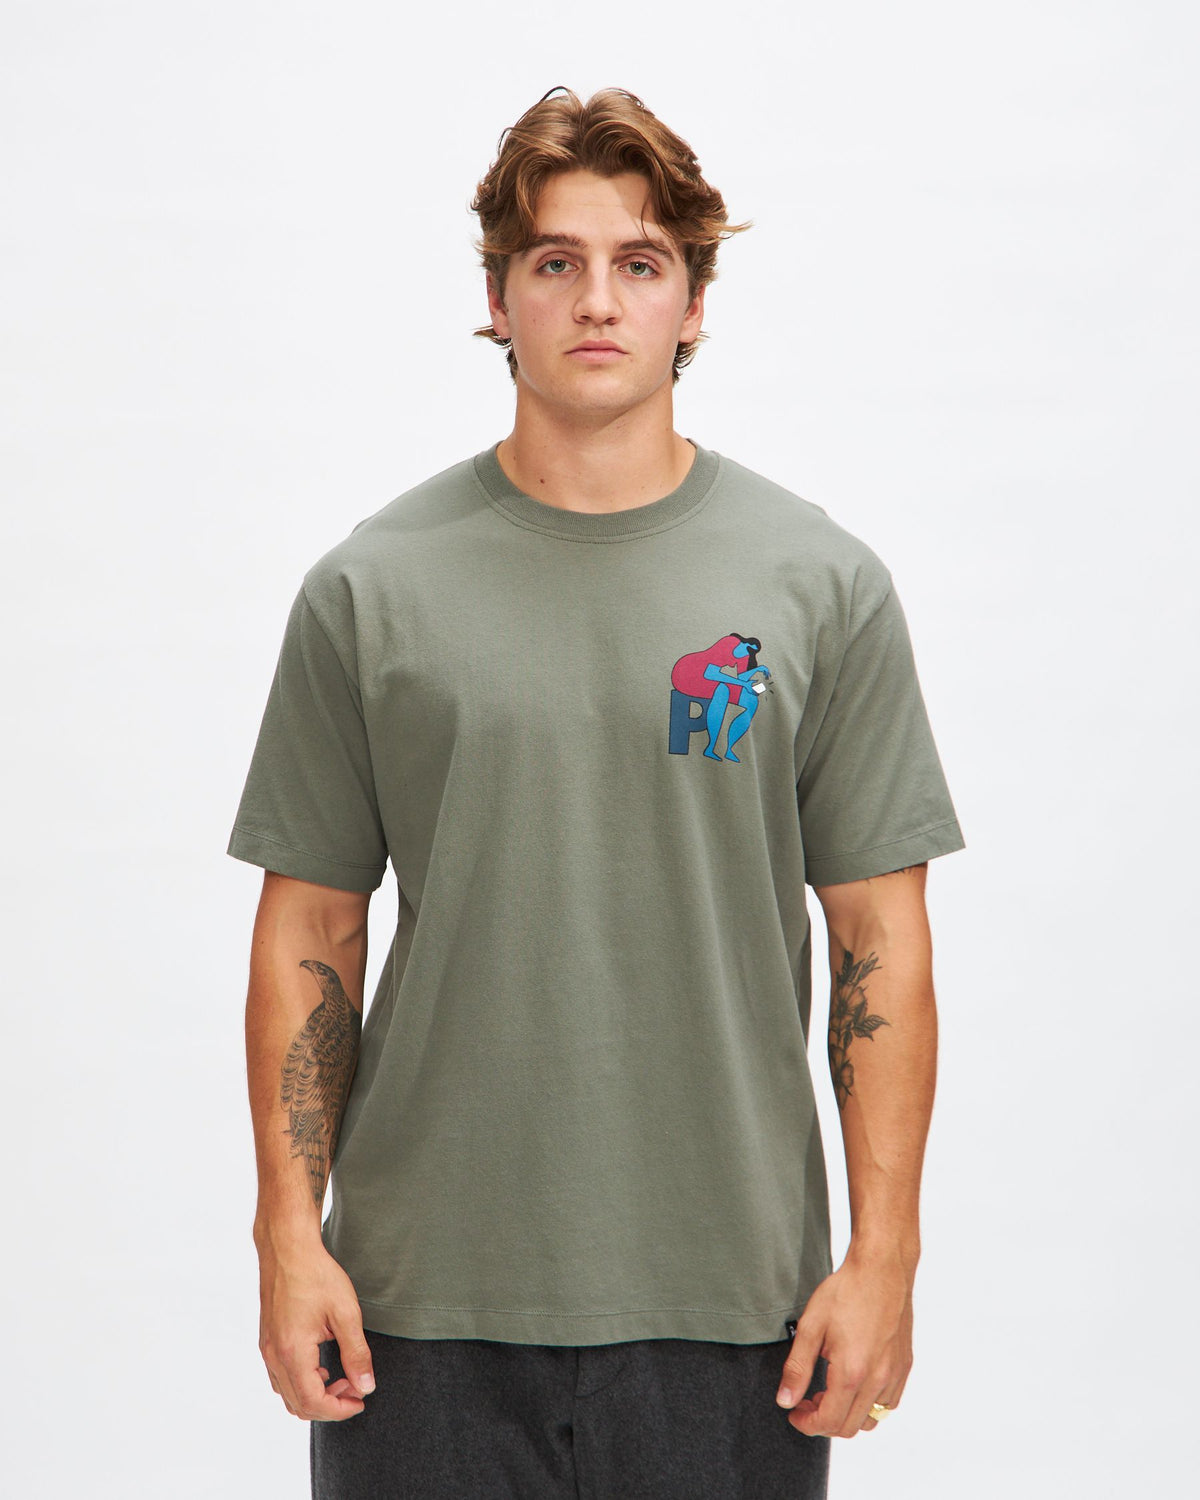 Insecure Days T-Shirt in Greyish Green